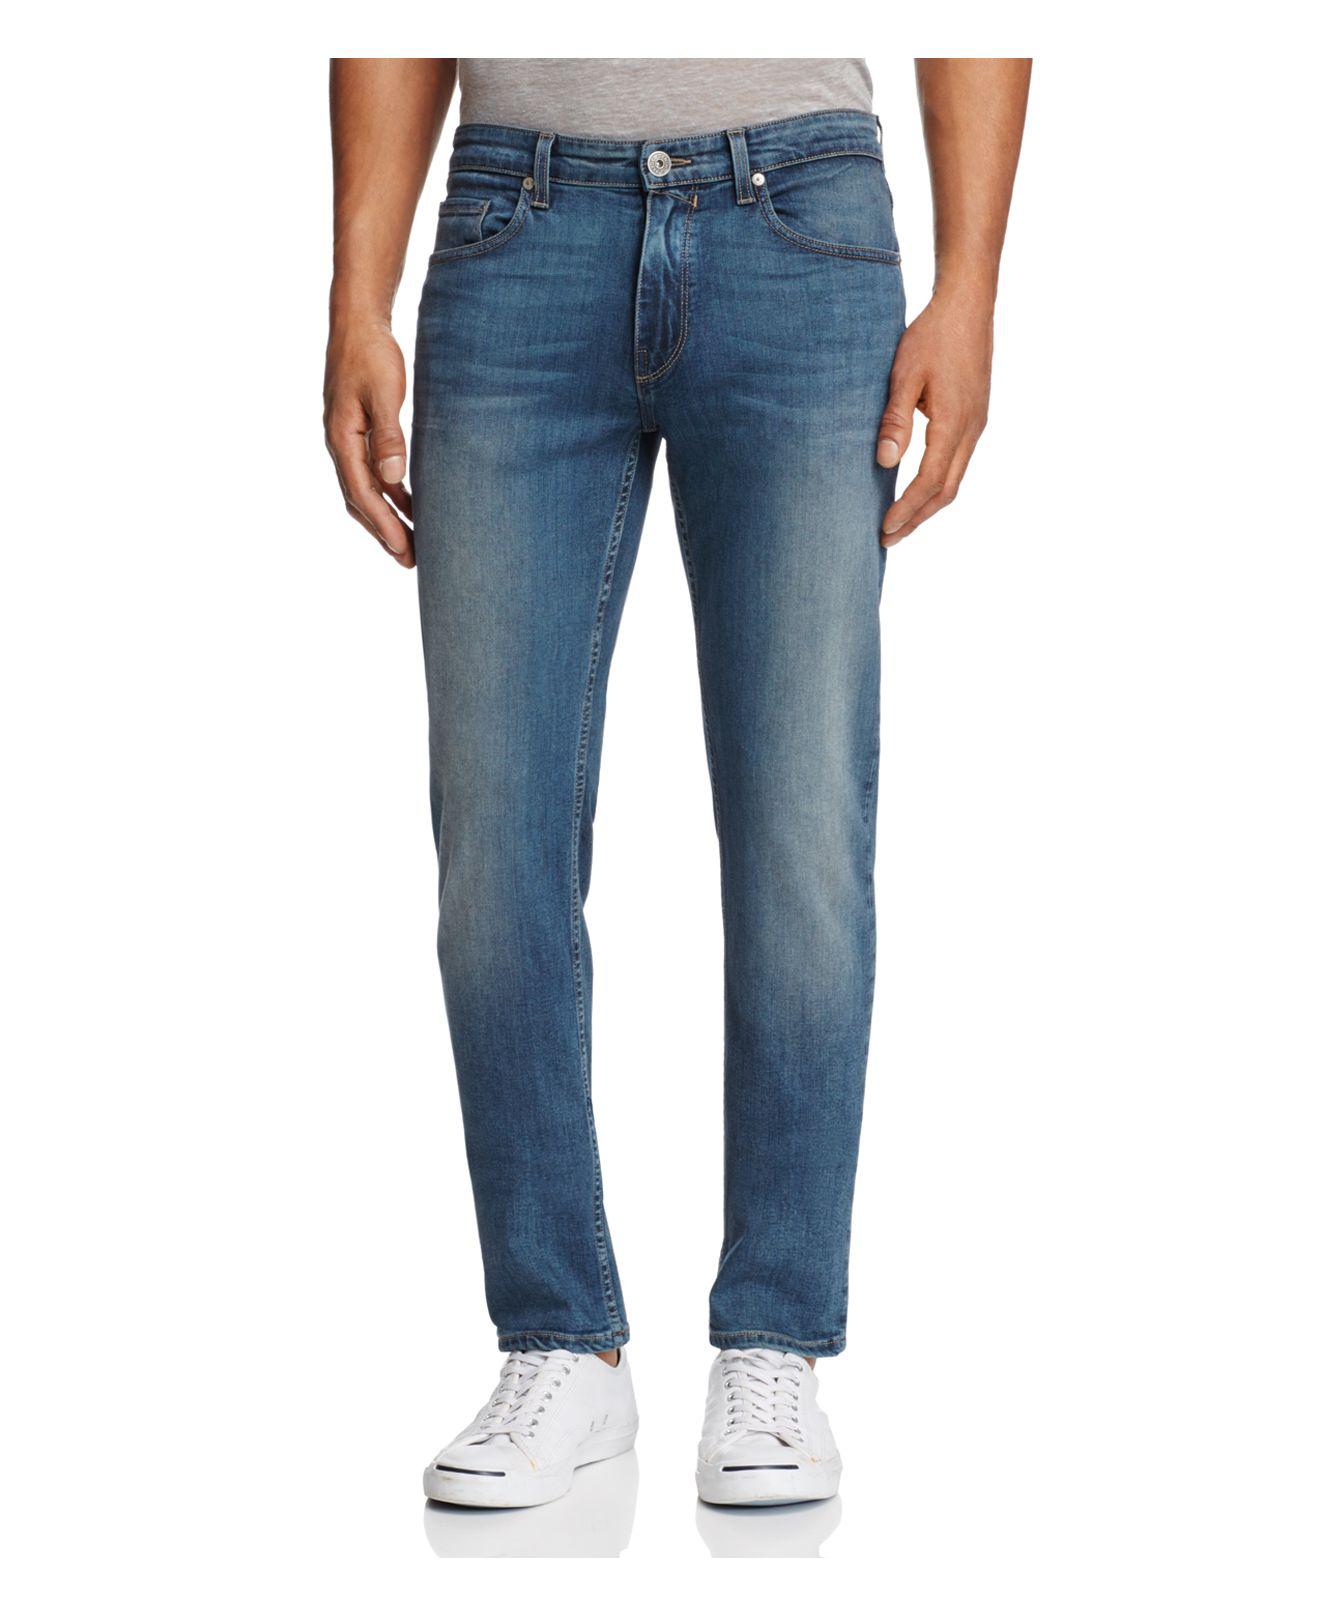 Lyst - Paige Federal Slim Fit Jeans In Carlyle in Blue for Men